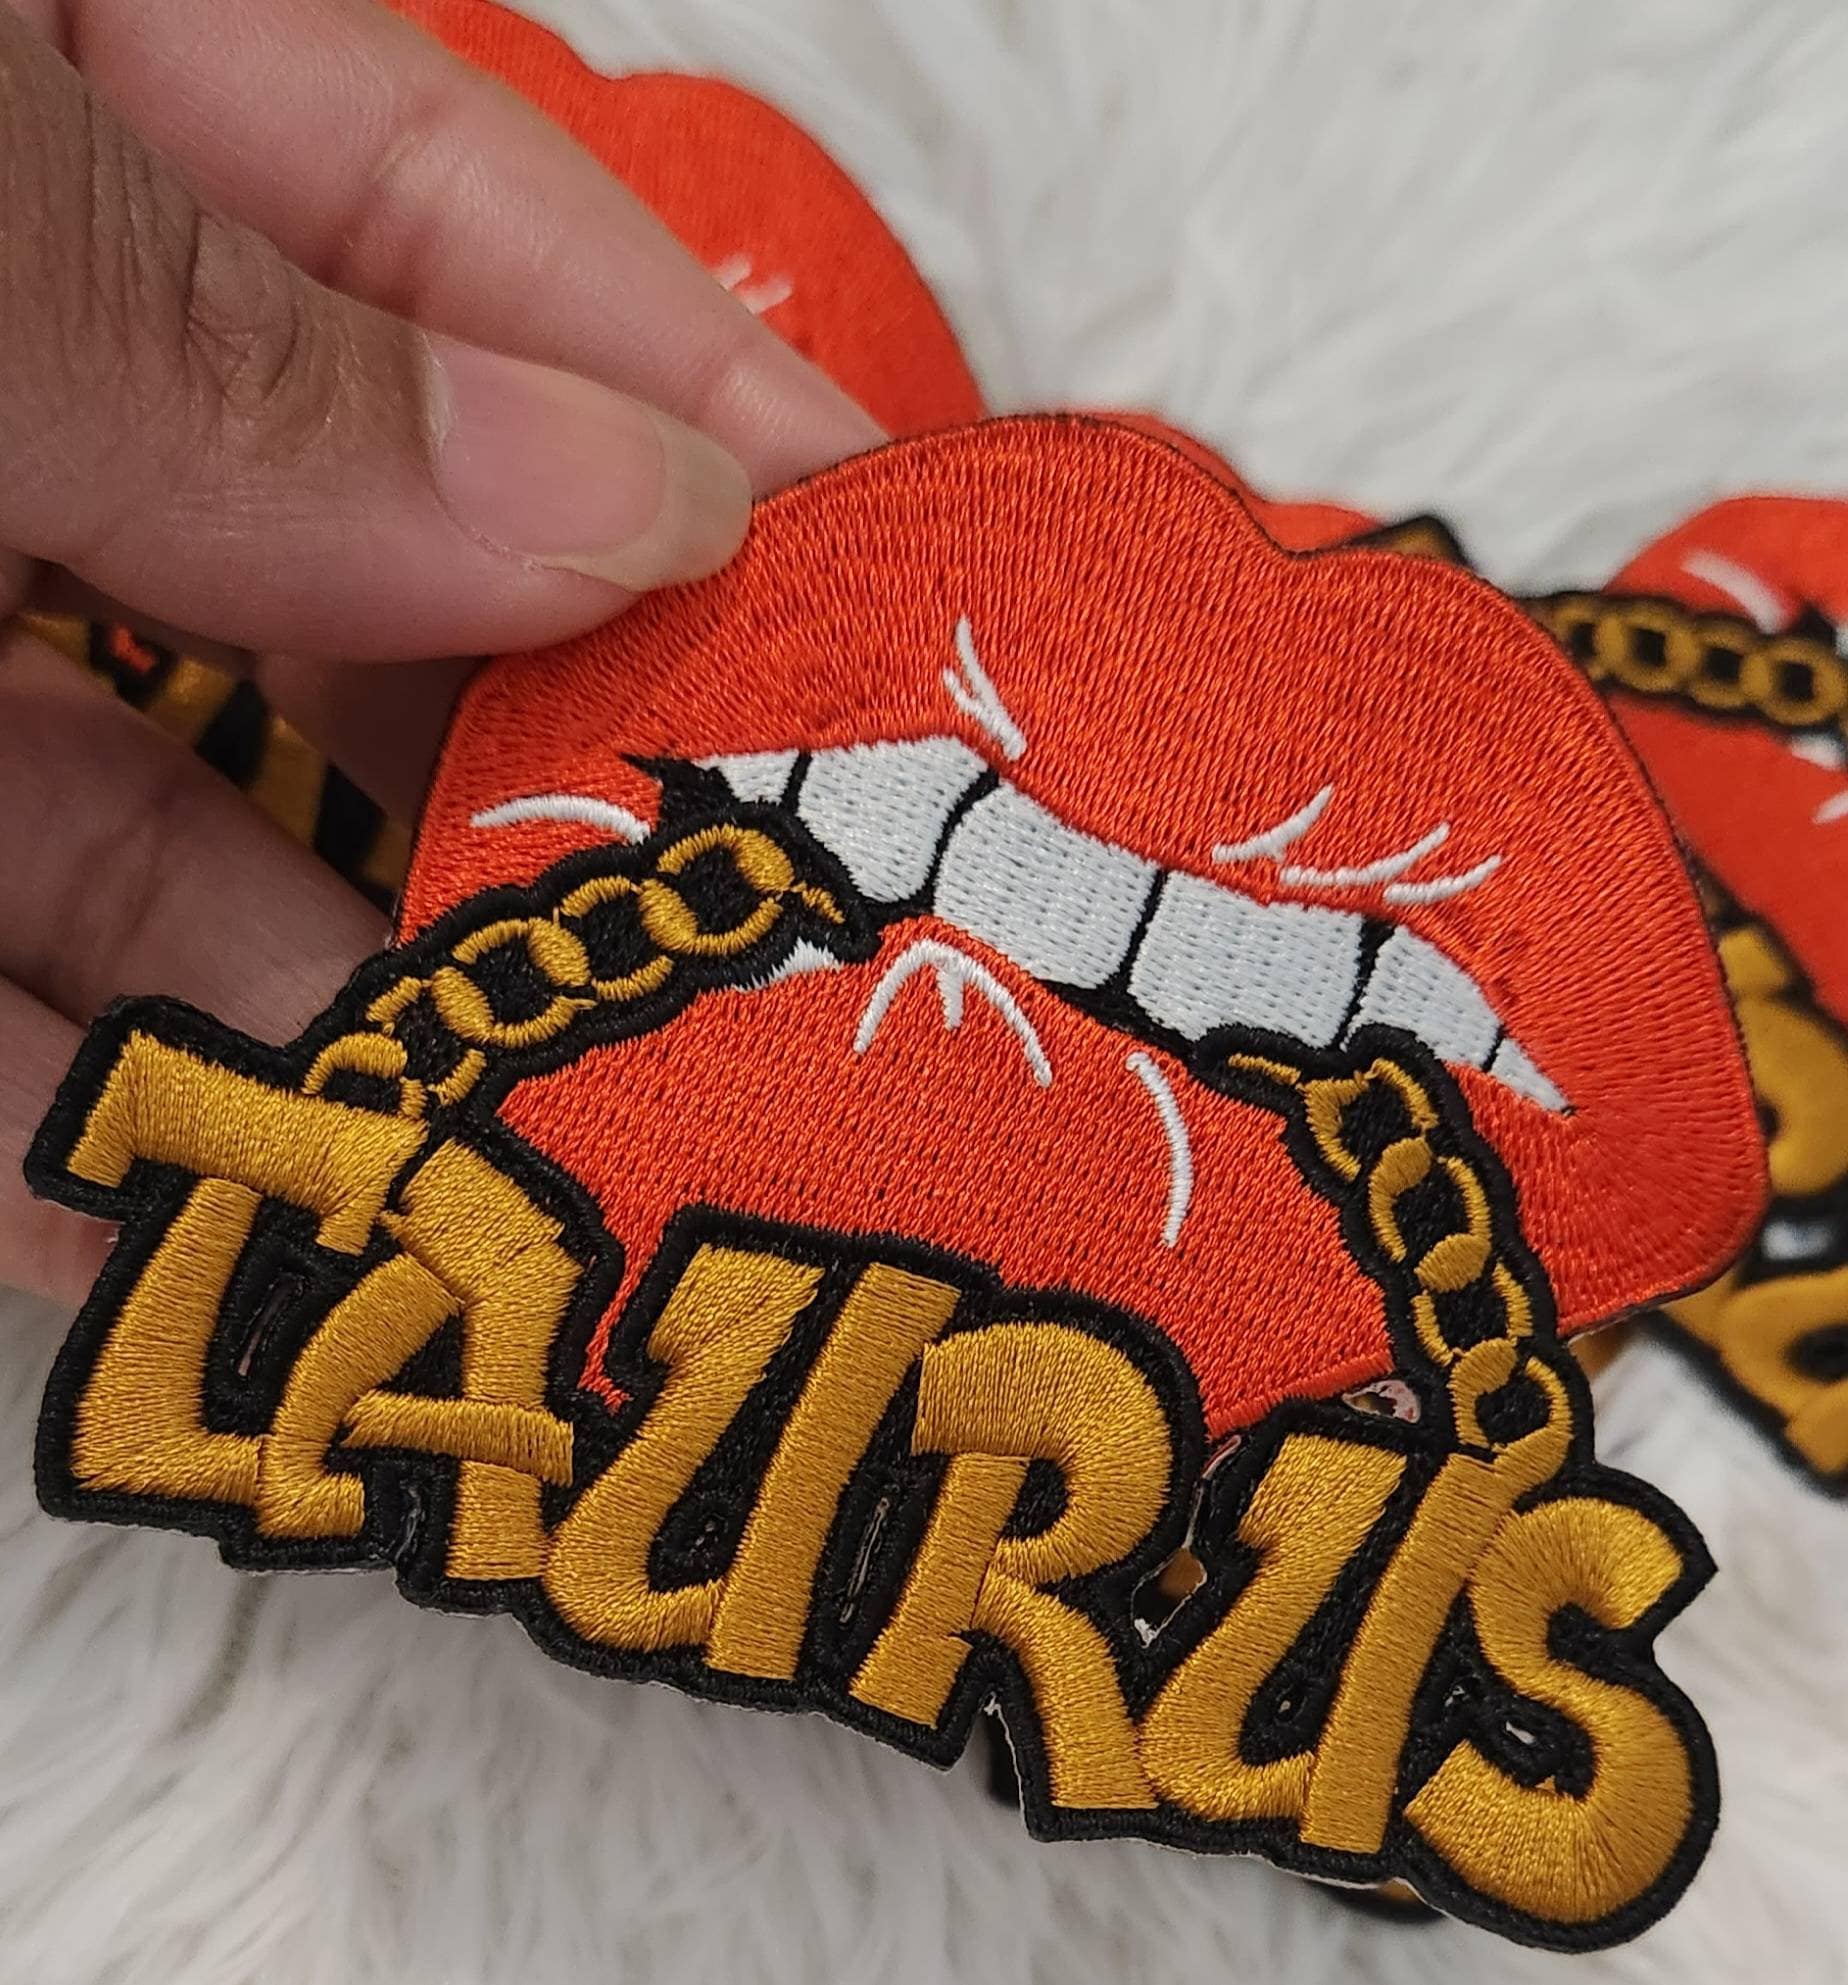 New Color, Poppin' Red Lip "Taurus" w/DARK Gold Chain|Iron-On Patch|Astrology Applique|Cool Embroidered Patch|DIY Patch